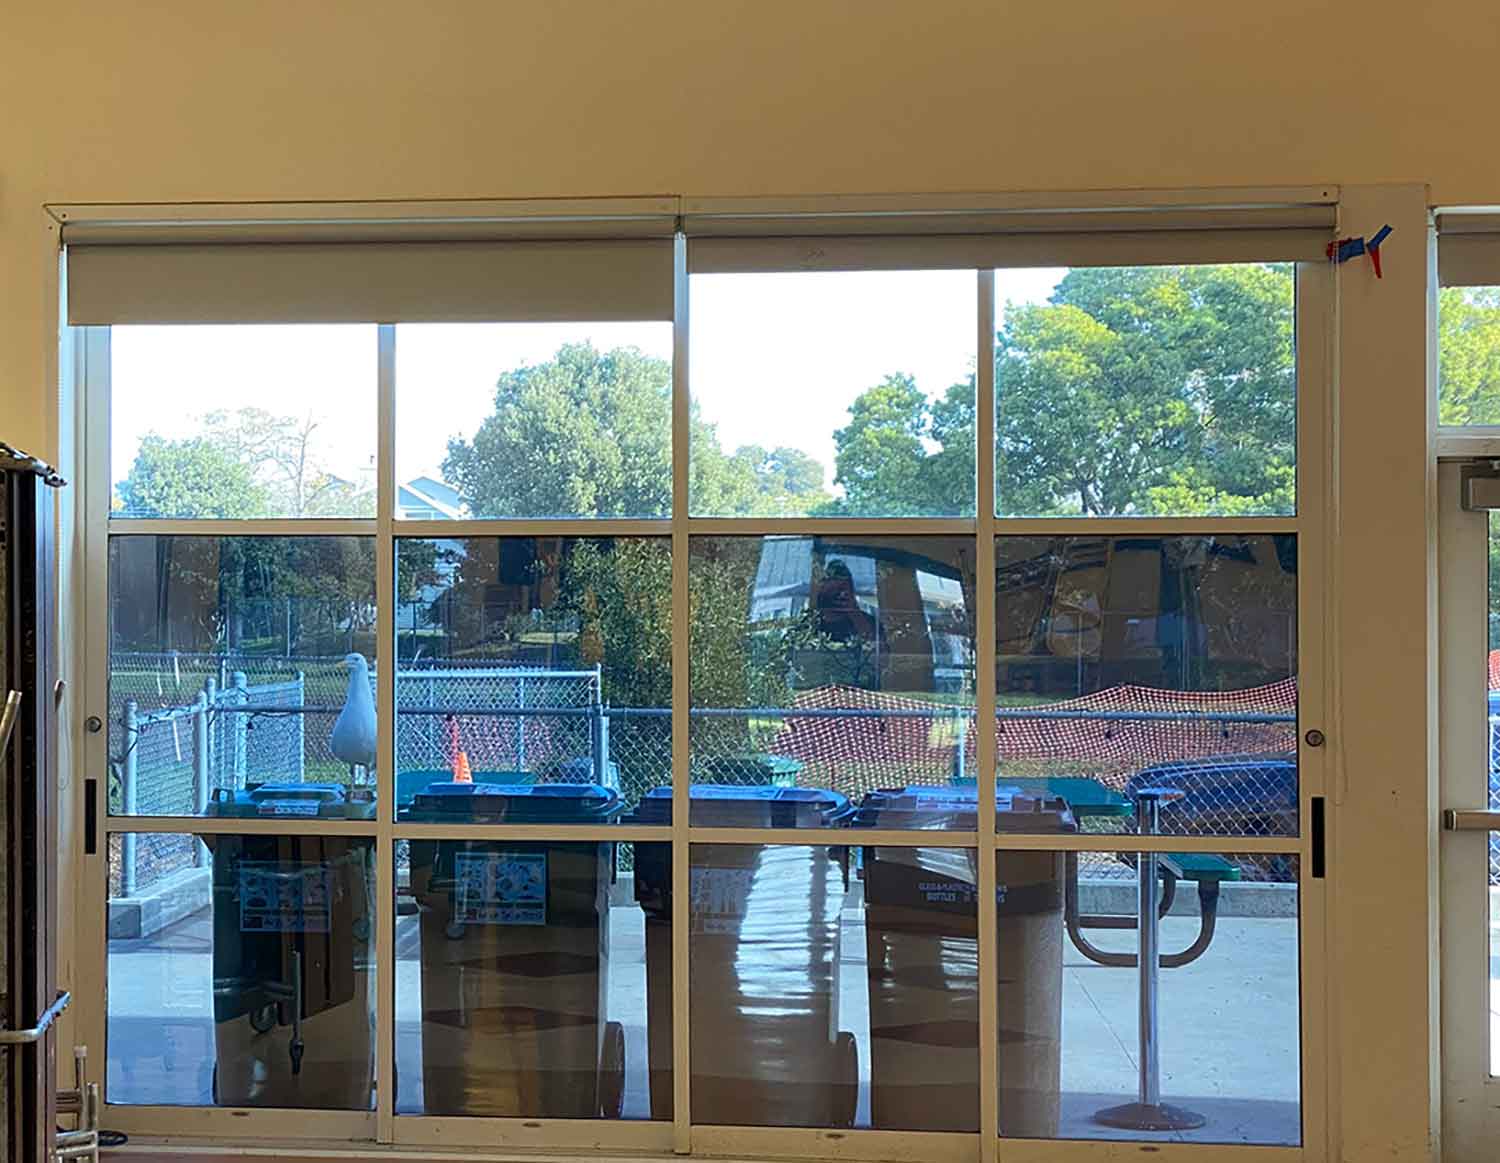 ClimatePro installed 3M window film for a school in San Rafael, CA. Get a free estimate today.